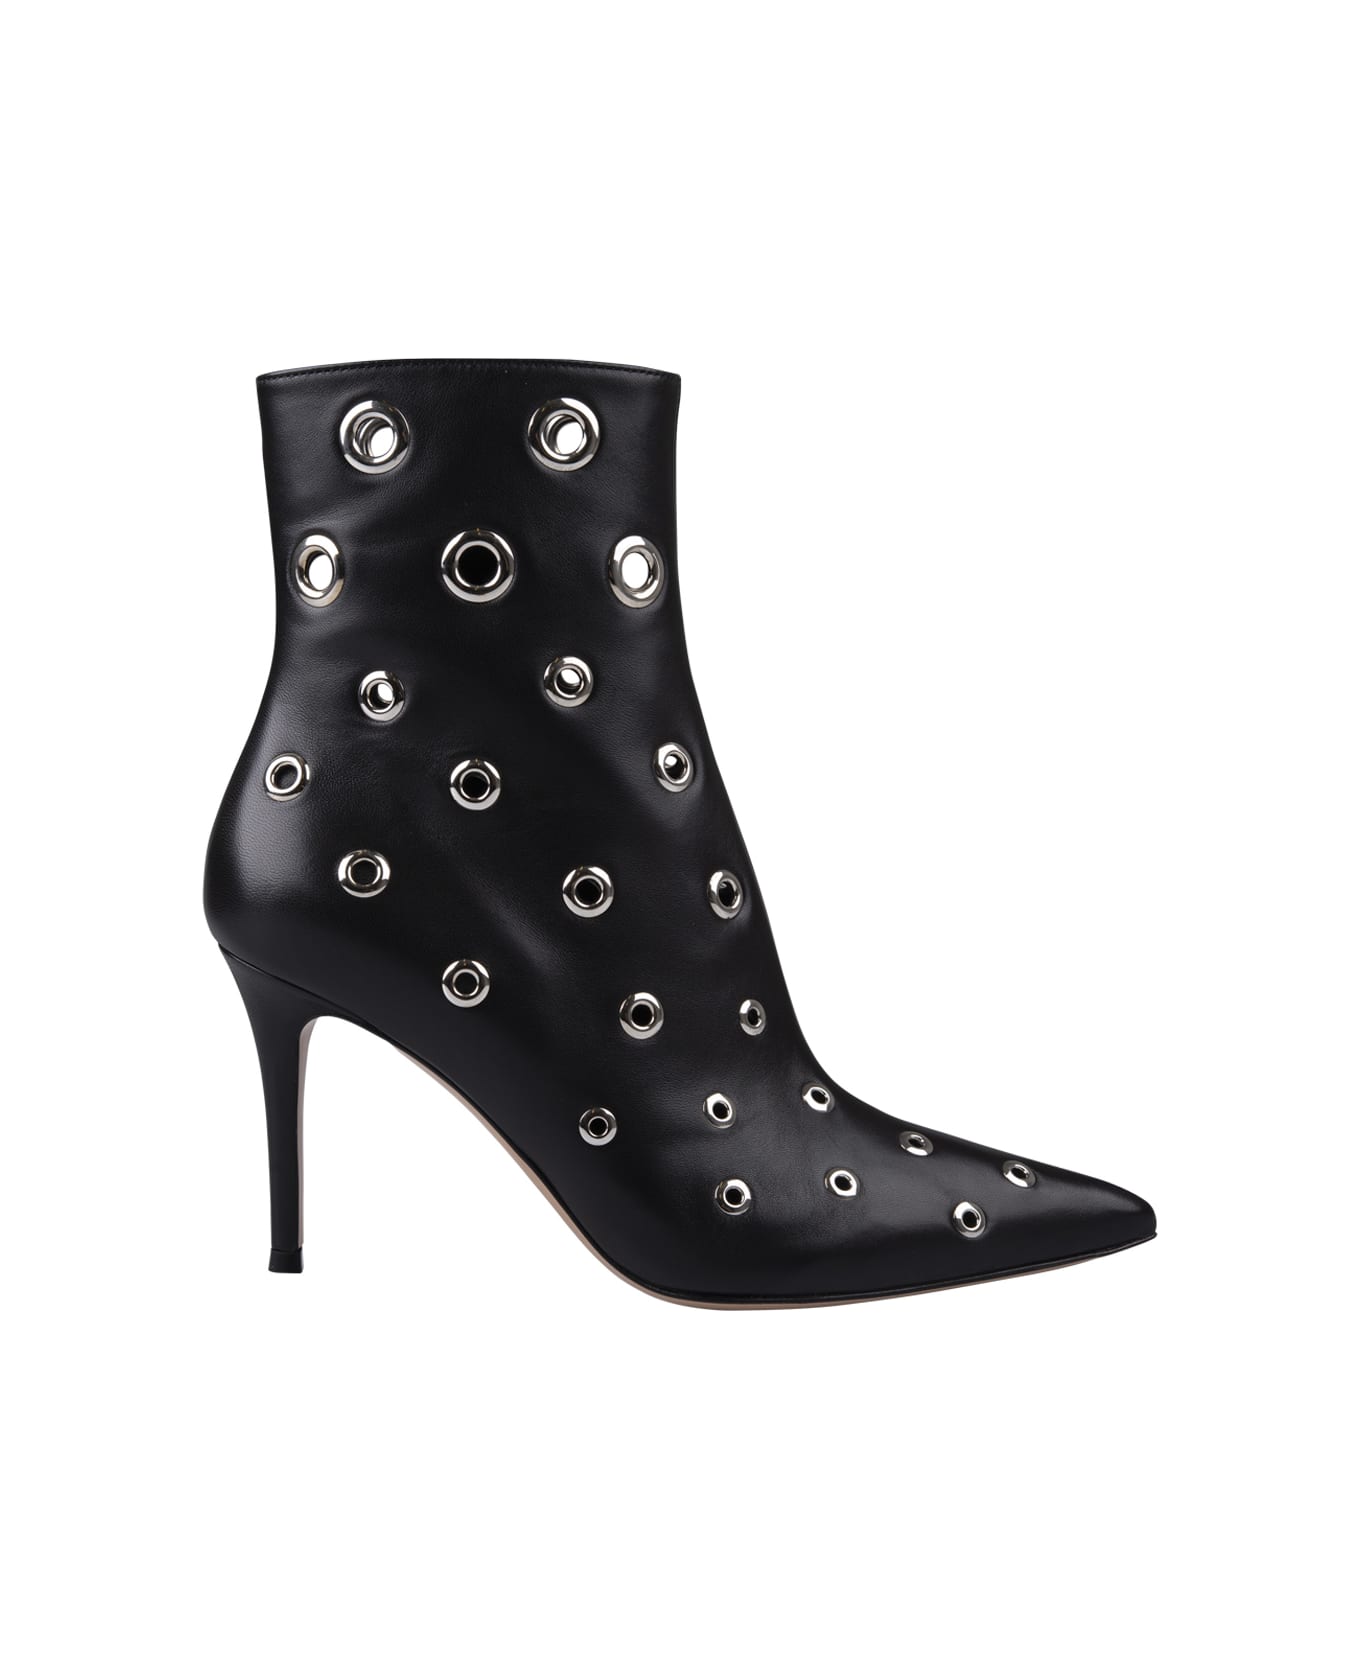 Gianvito Rossi Lydia Bootie 85 Ankle Boots In Black - Black ブーツ